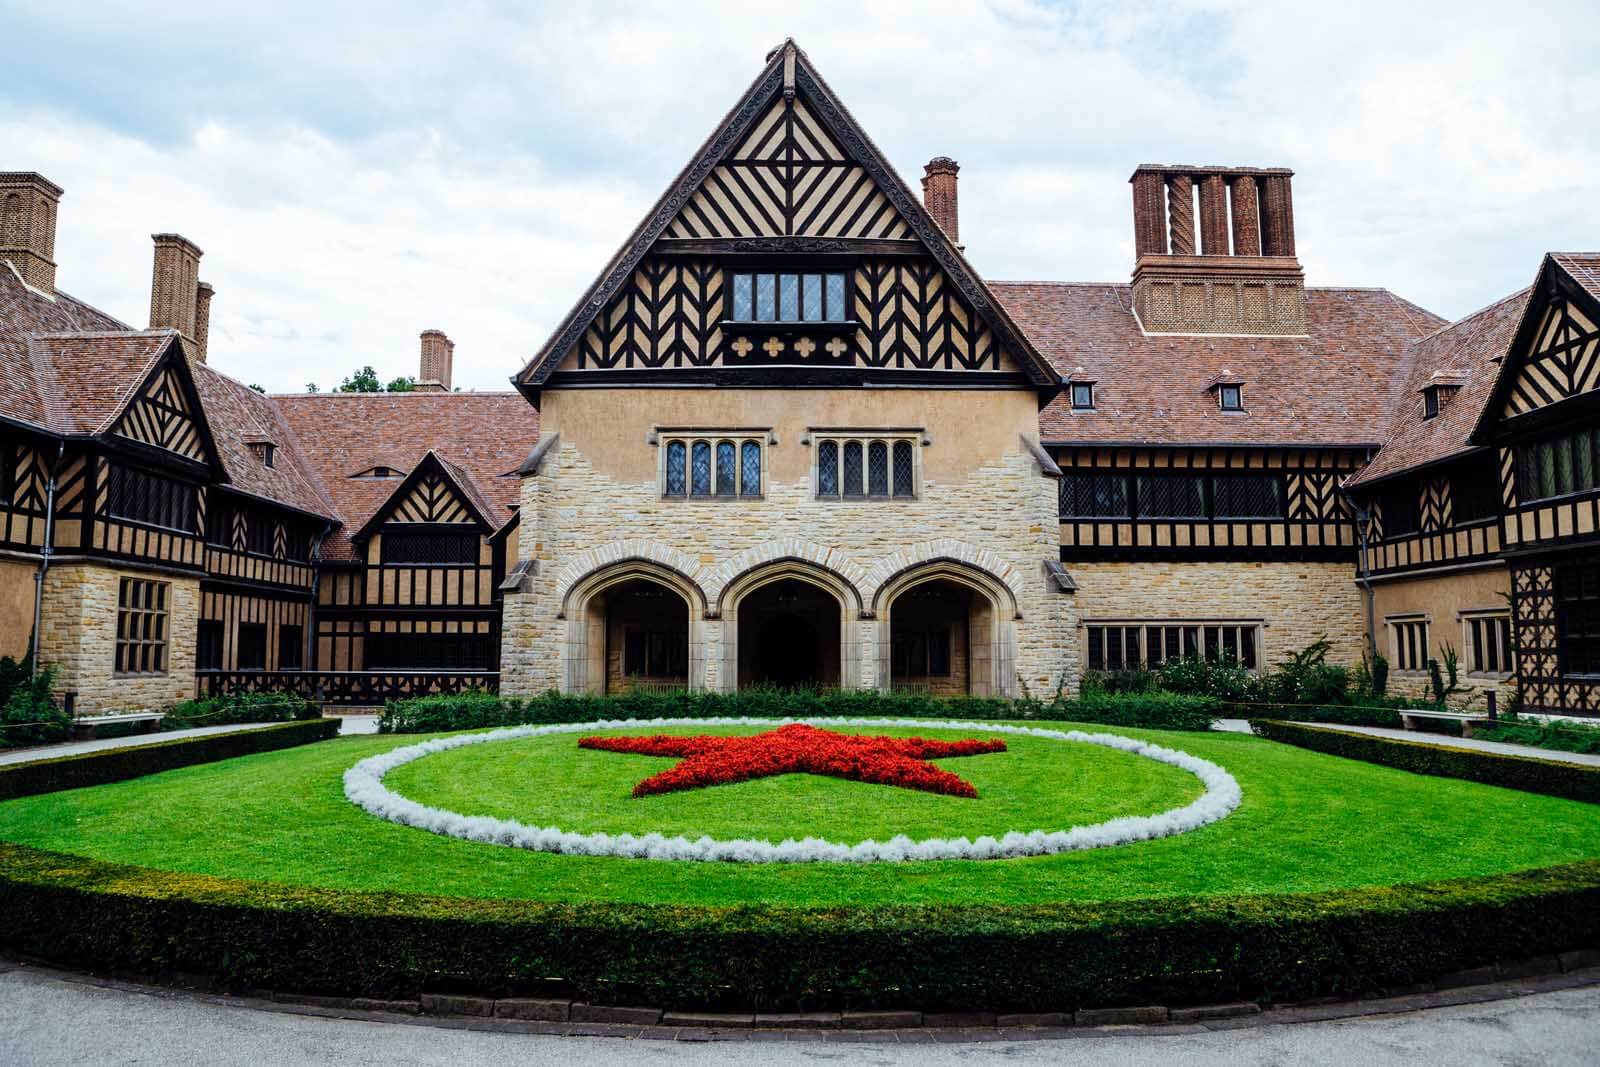 Cecilienhof palace where the Potsdam Conference was held in 1945